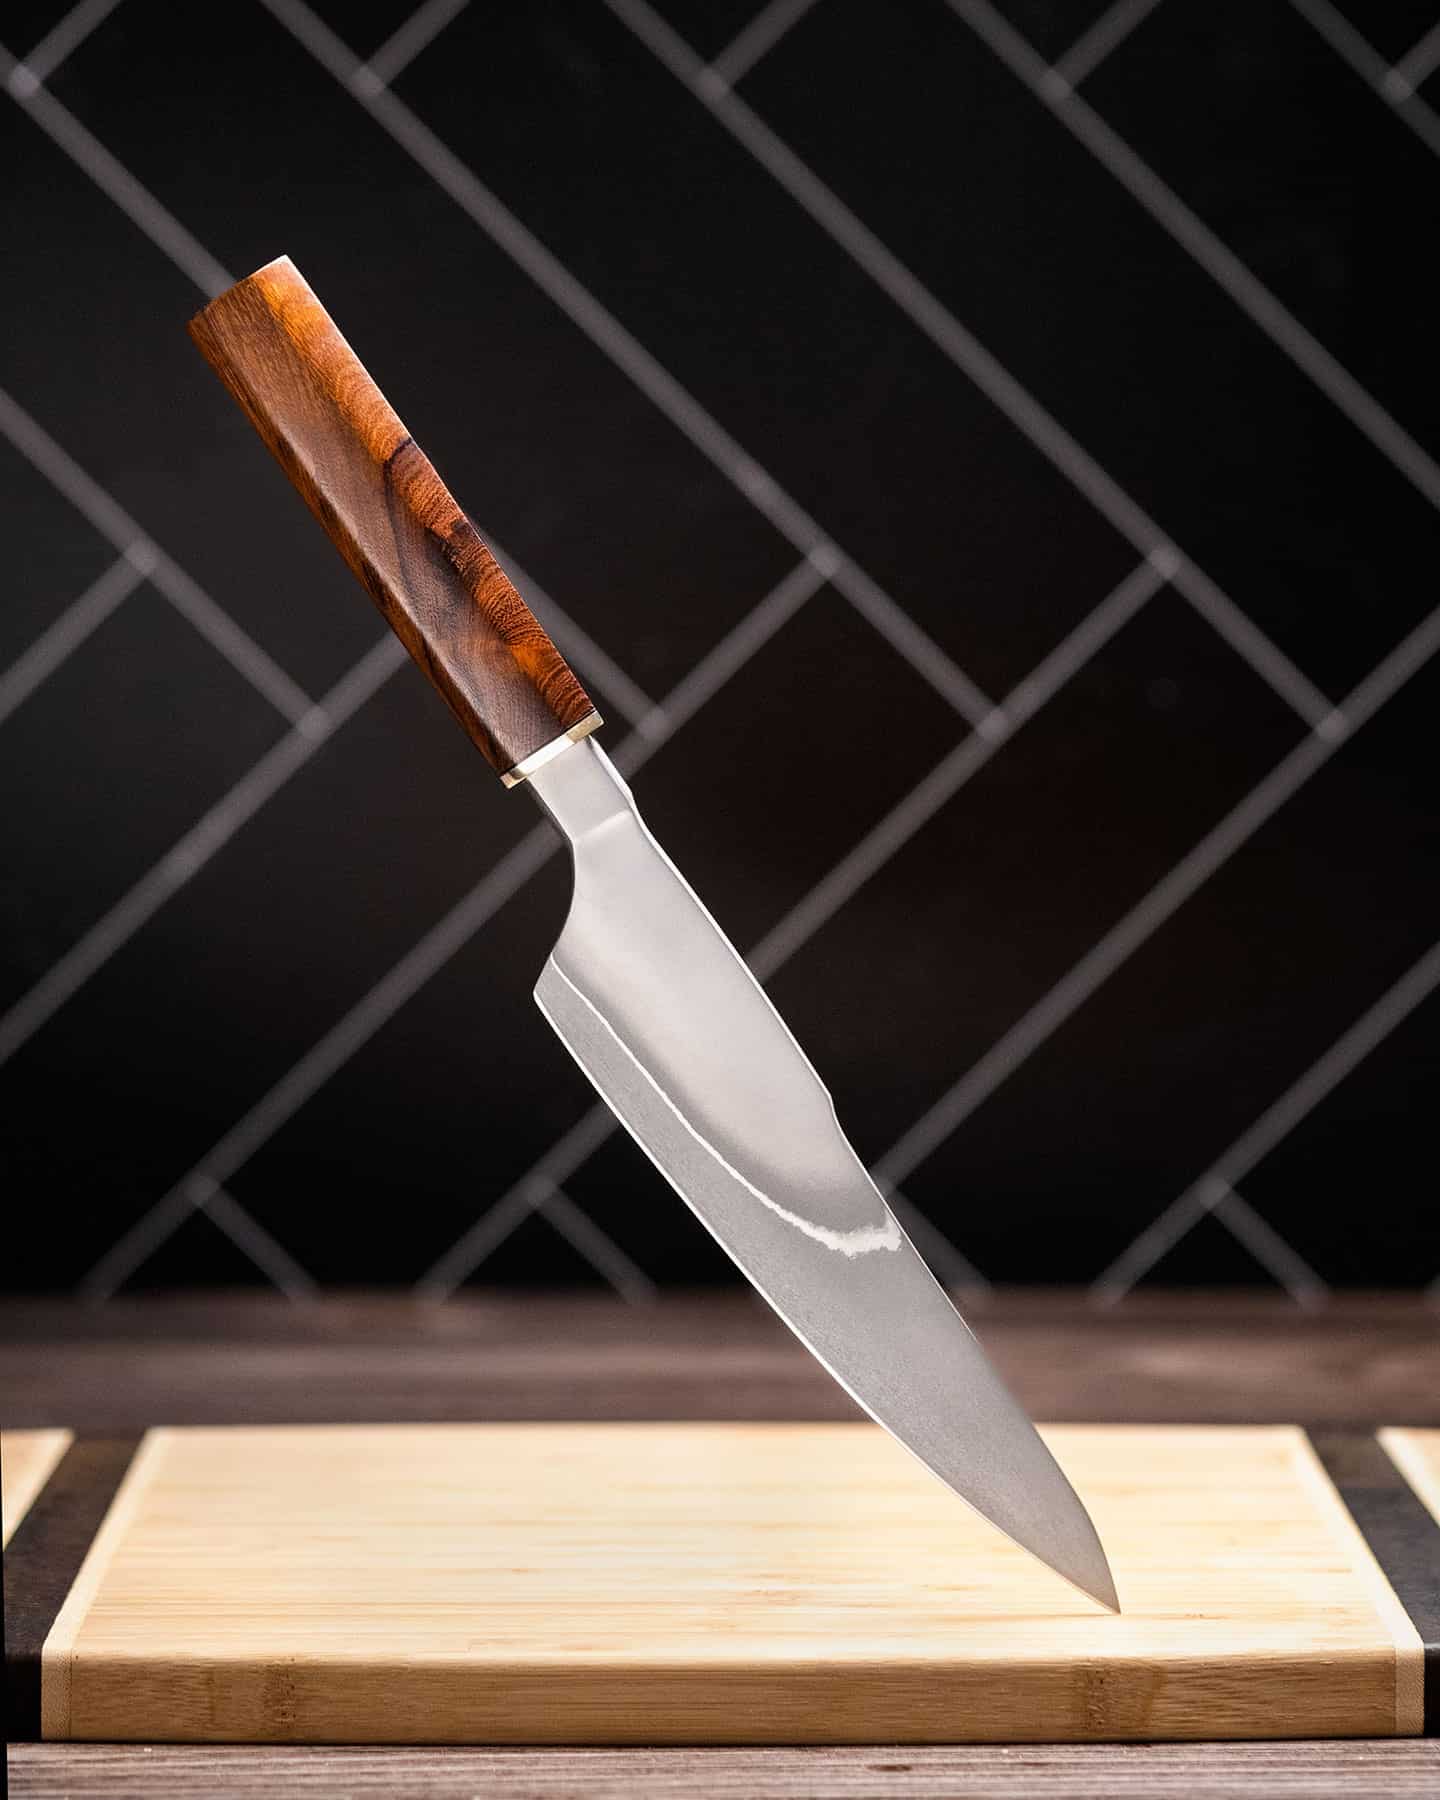 https://www.nothingbutknives.com/wp-content/uploads/2022/08/Xin-Cutlery-XinCraft-Chef-Knife-Review.jpg